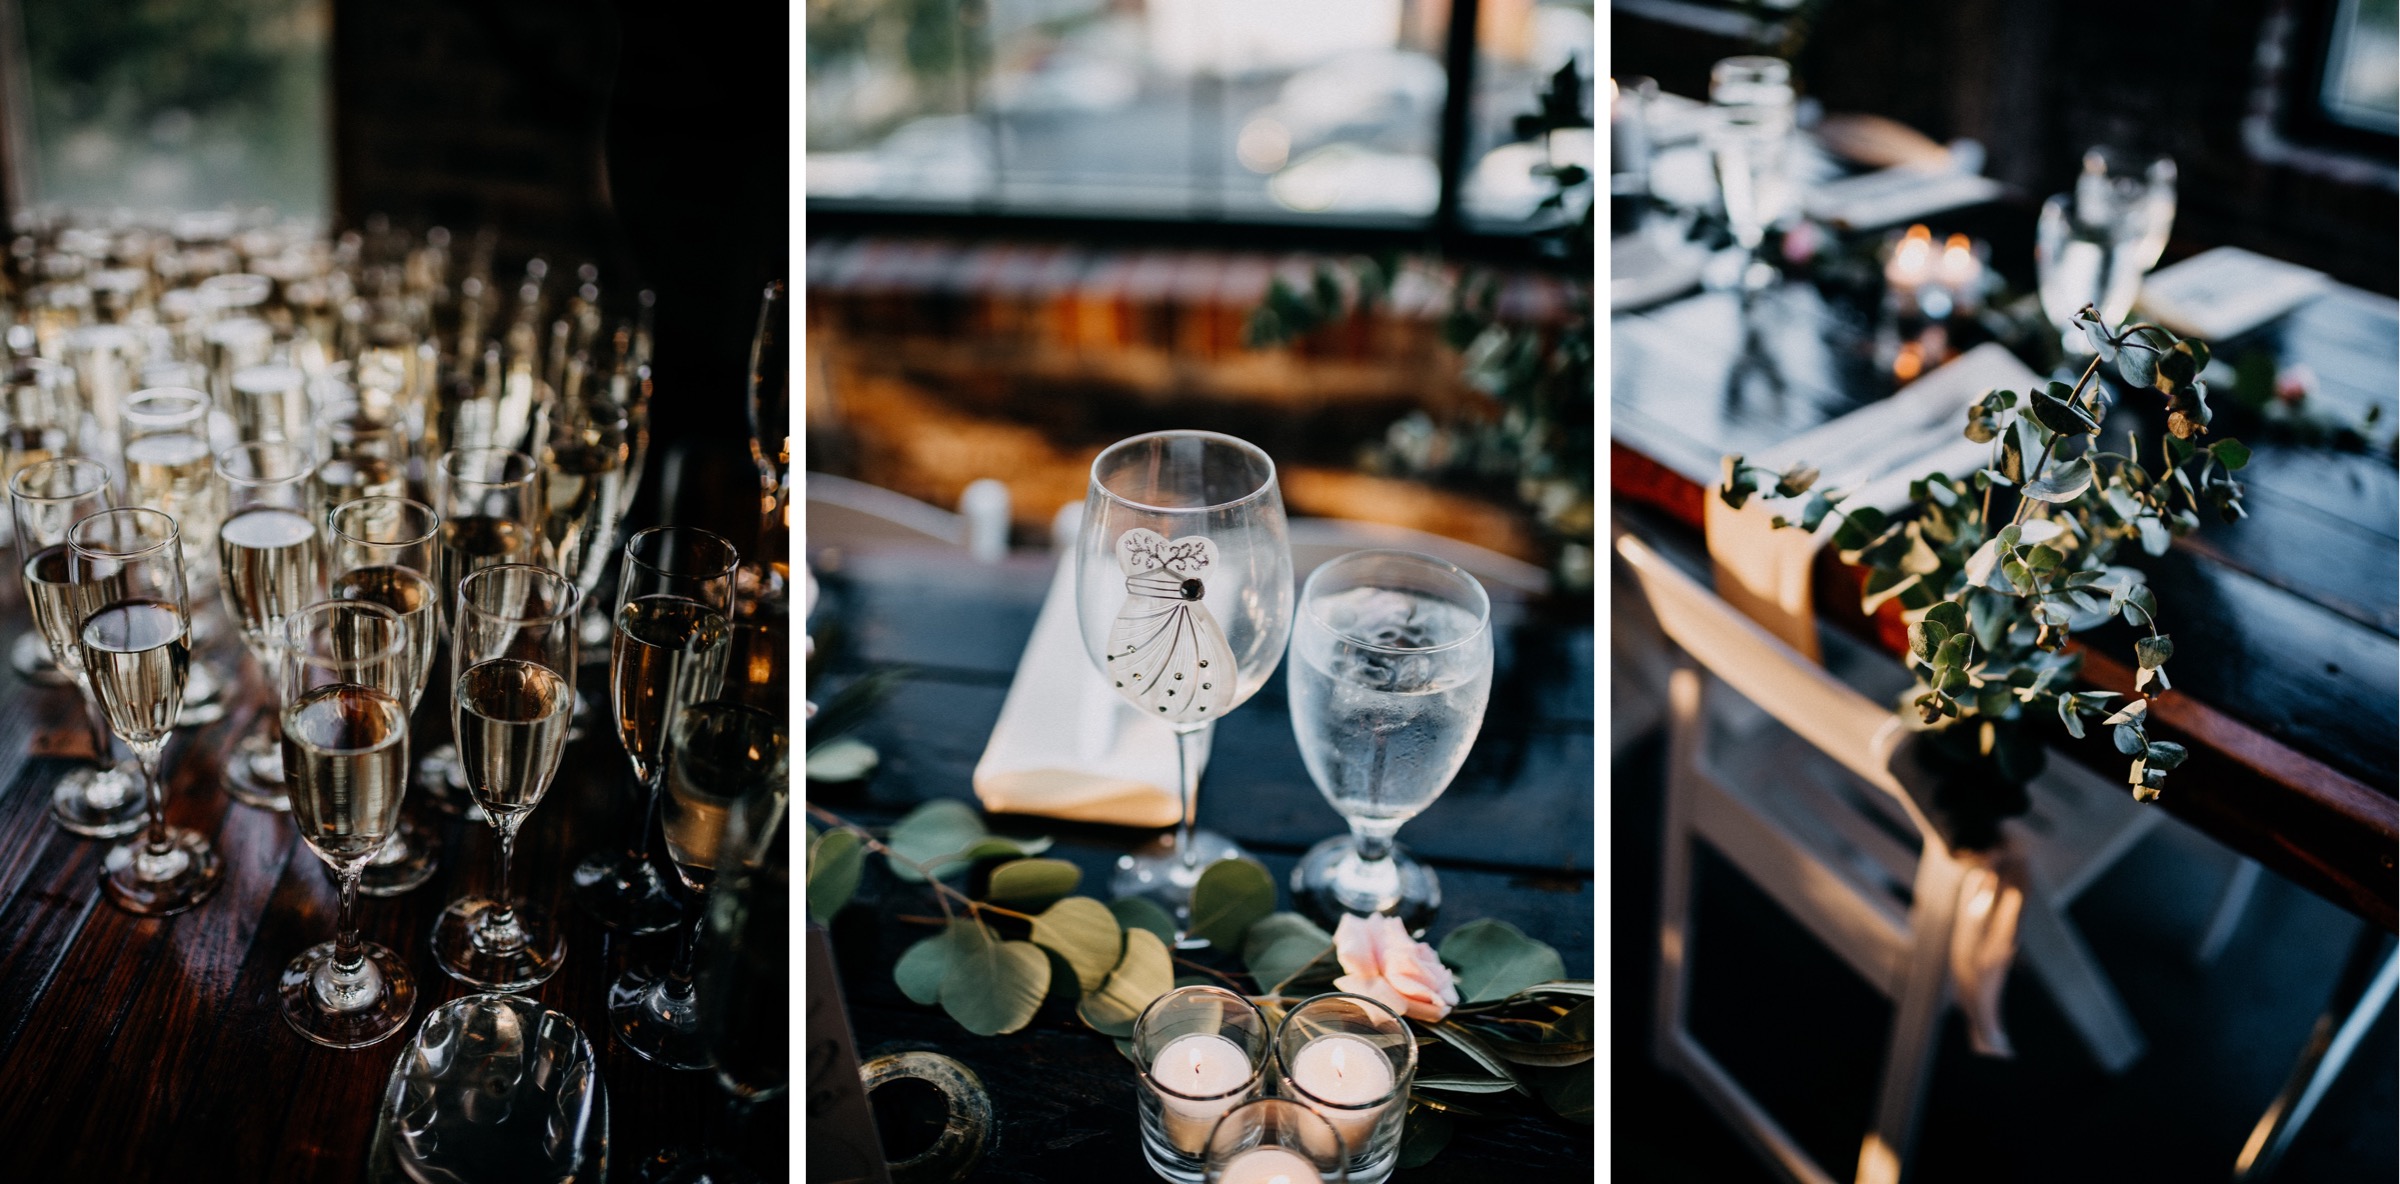 collage of details of champagne glasses and tabletop florals at a wedding reception